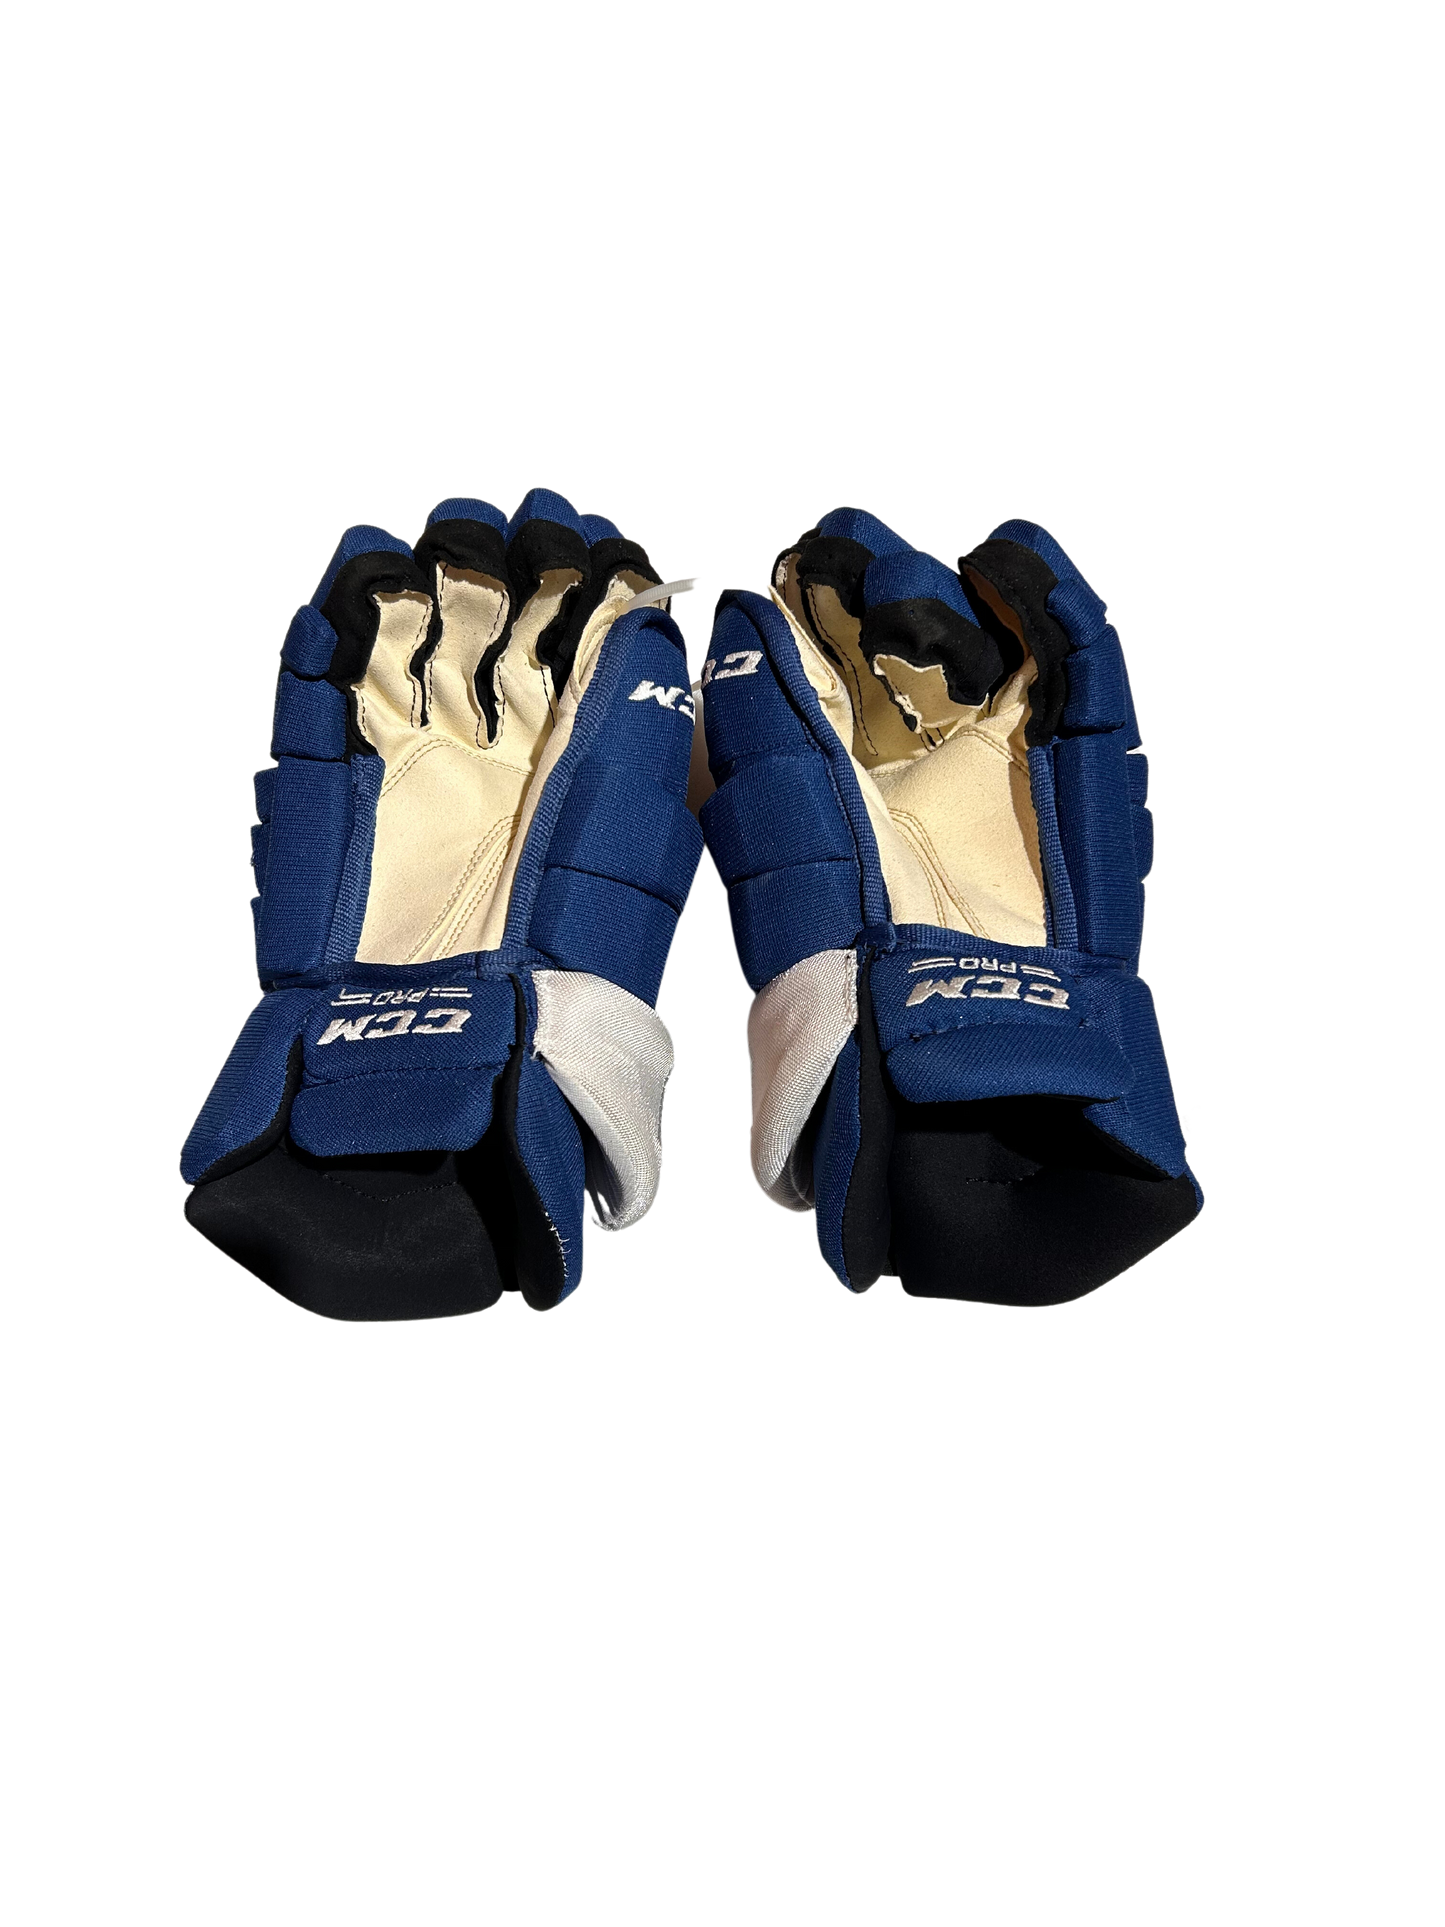 New Player Issued Blue Colorado Avalanche CCM HGTK Gloves (Multiple Names/Sizes)